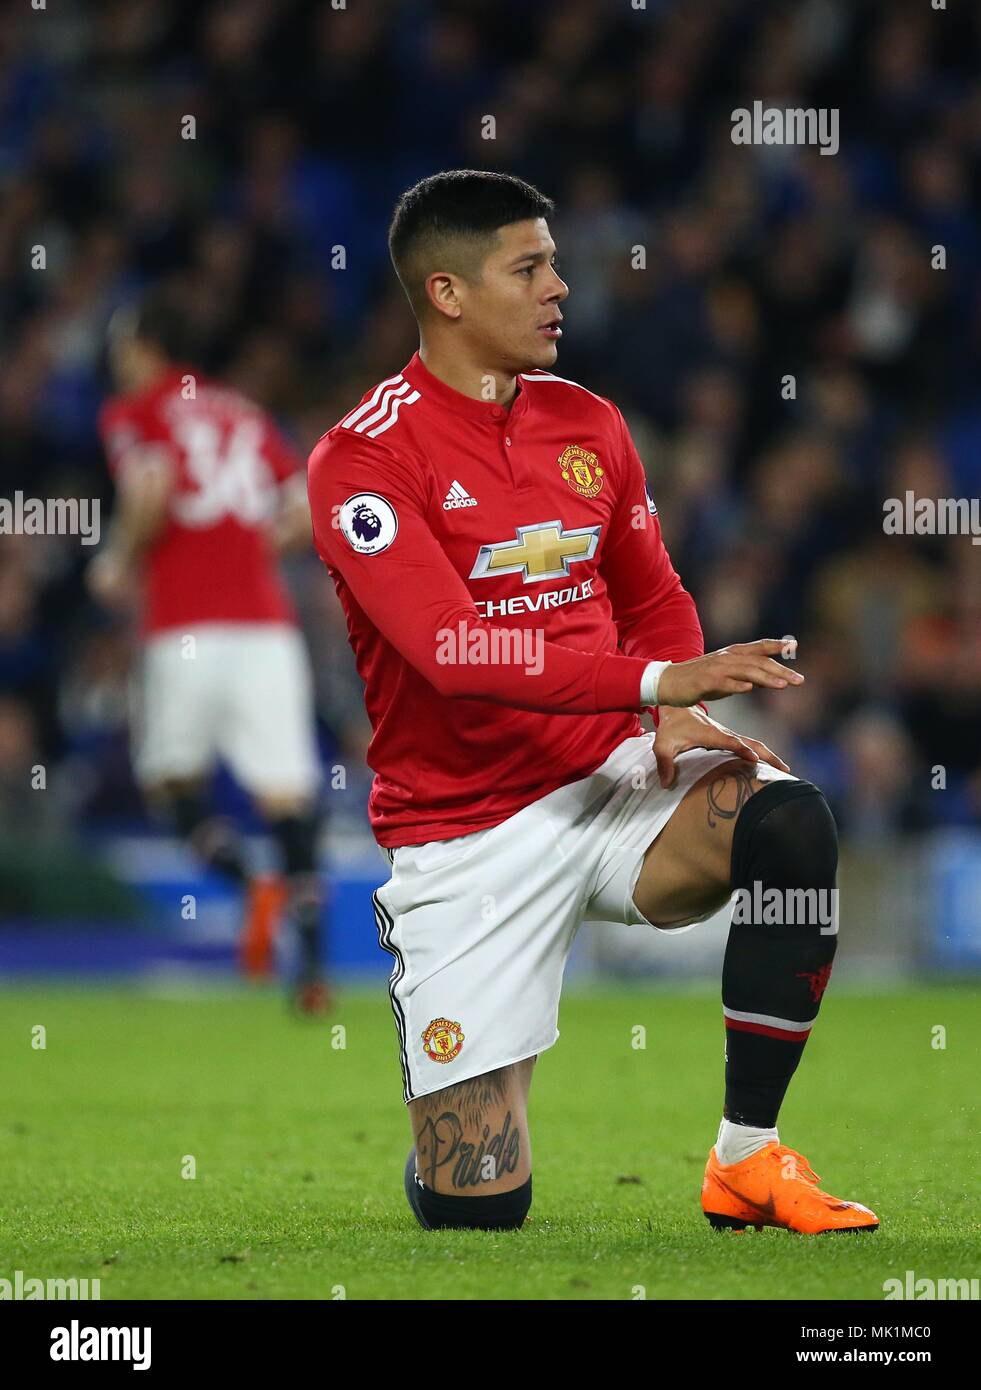 Marcos Rojo of Manchester United during the Premier League match between Brighton and Hove Albion and Manchester United at the American Express Community Stadium in Brighton and Hove. 04 May 2018 *** EDITORIAL USE ONLY ***  No merchandising. For Football images FA and Premier League restrictions apply inc. no internet/mobile usage without FAPL license - for details contact Football Dataco Stock Photo